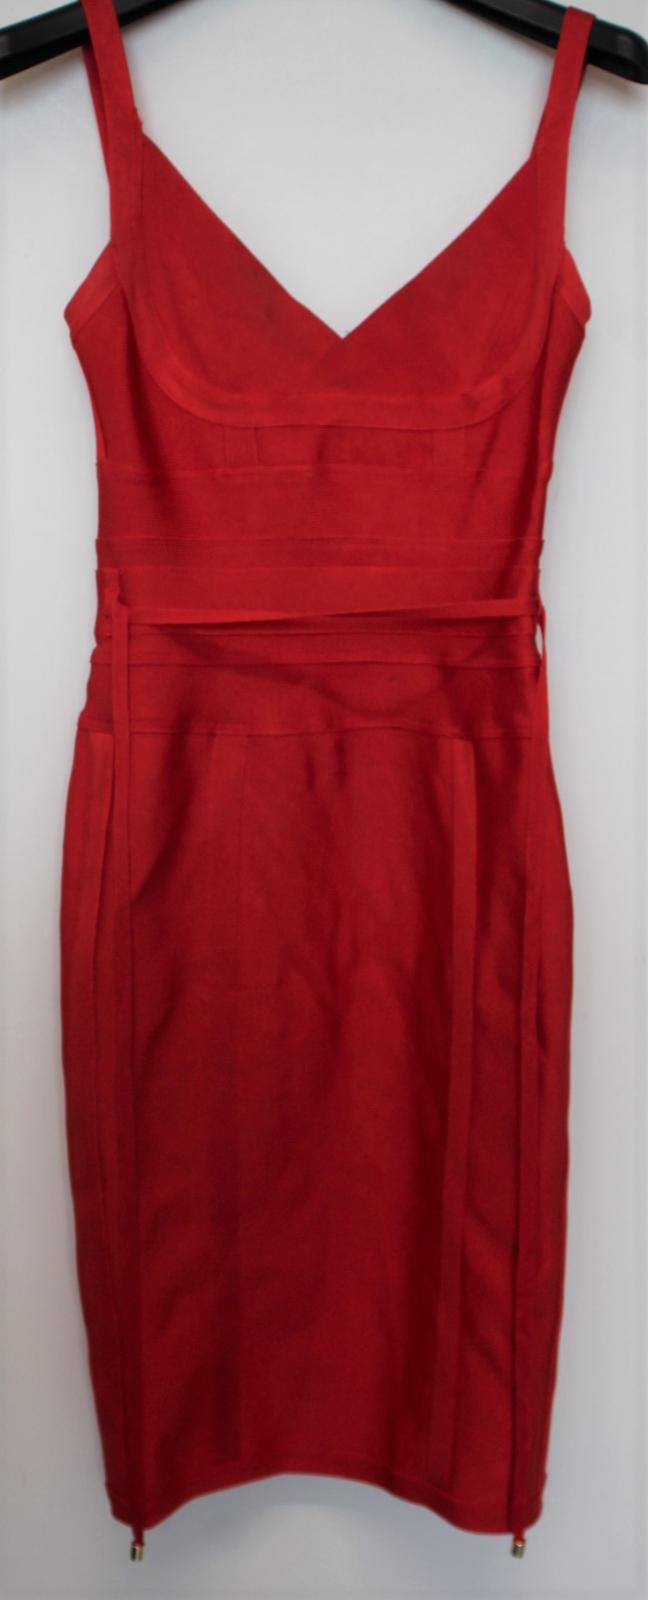 HOUSE OF LONDON Ladies Scarlet Red Stretch Fit Sleeveless Bodycon Dress Size S